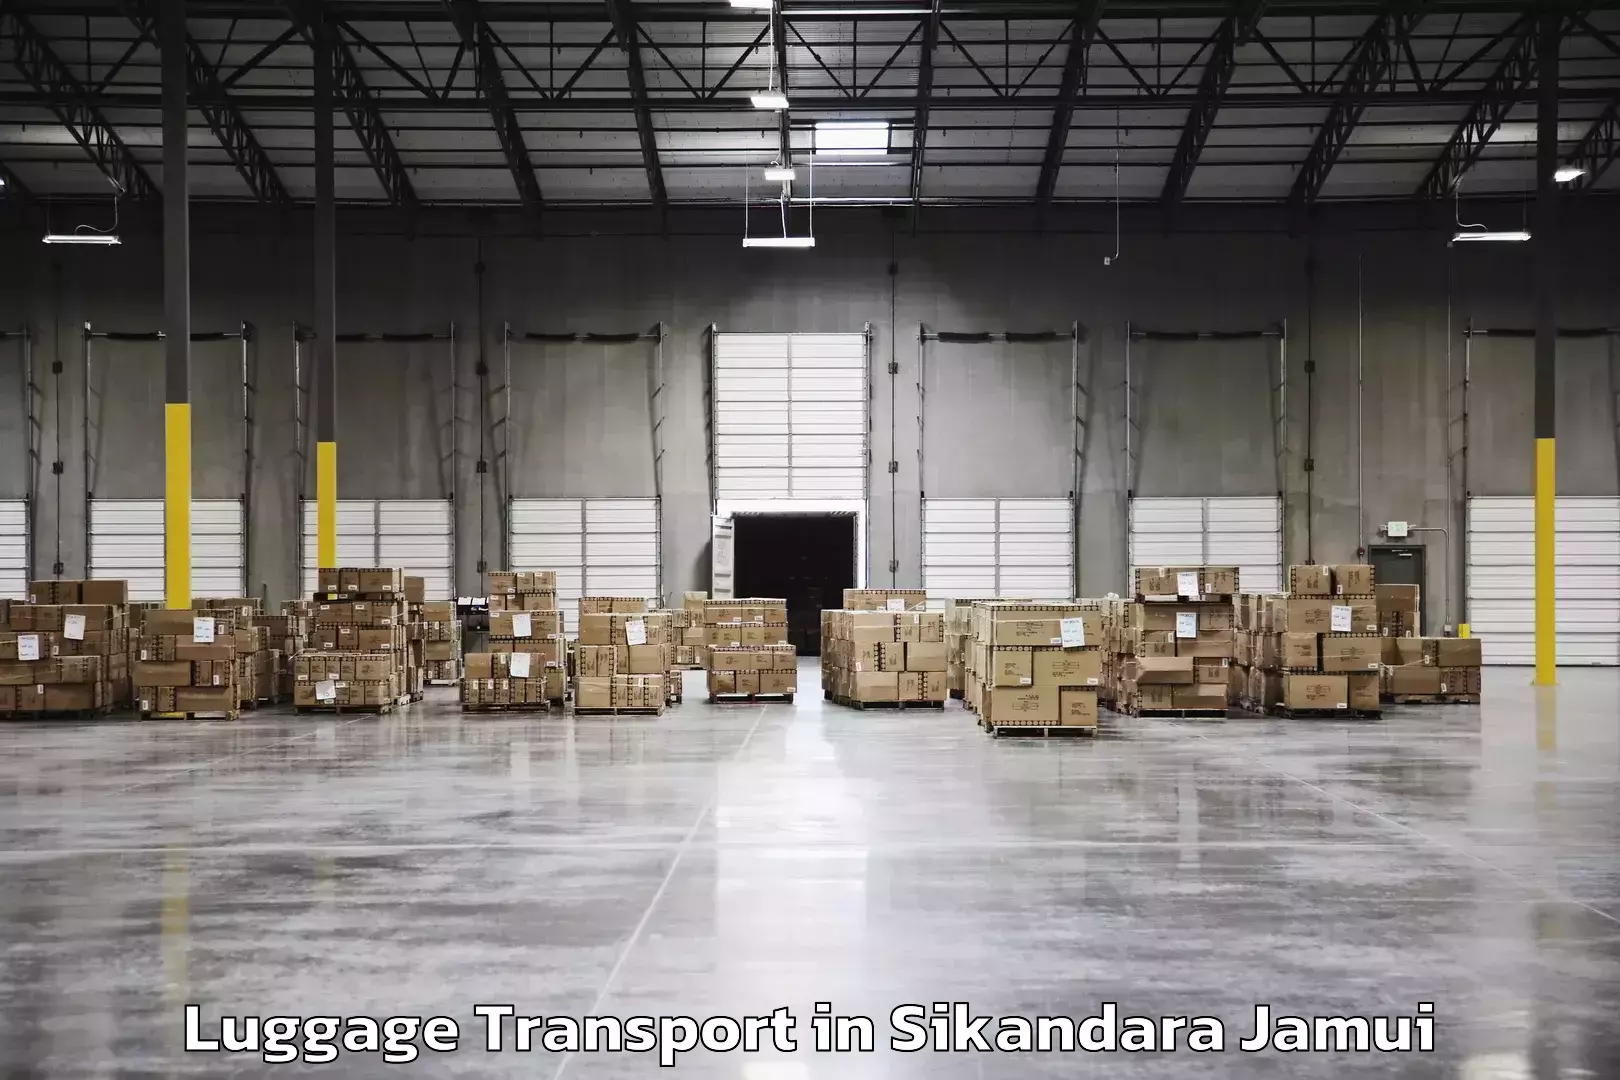 Luggage delivery operations in Sikandara Jamui